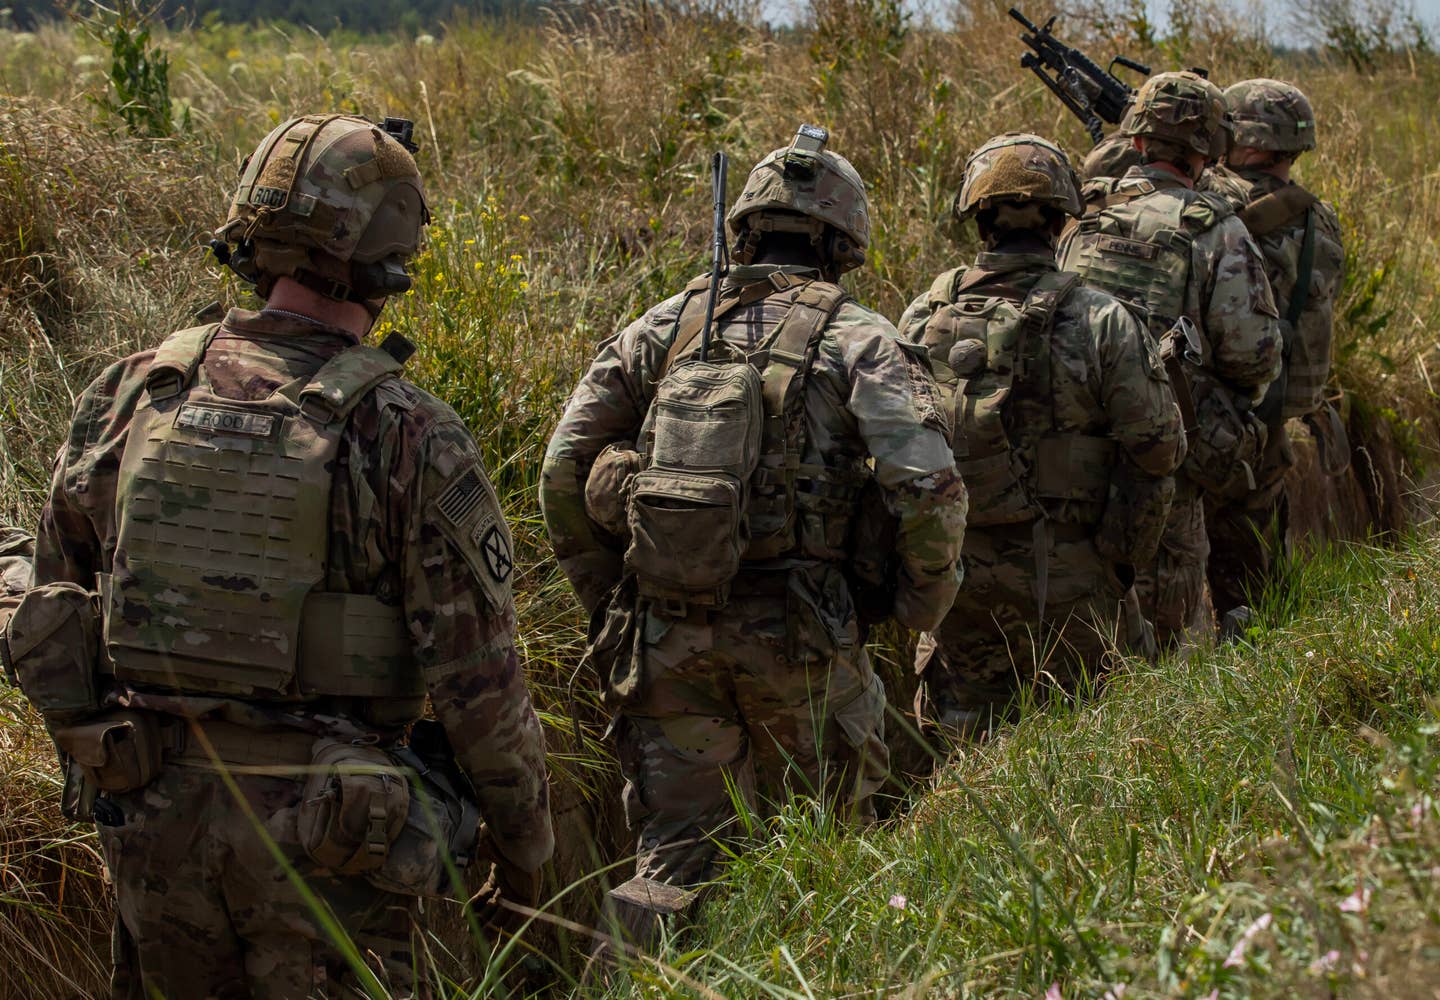 U.S. Army Soldiers with Charlie Company, 1st Battalion, 9th Cavalry Regiment, 1st Cavalry Division, supporting the 4th Infantry Division, enter and clear a trench during a live-fire exercise on a range at Bemowo Piskie Training Area, Poland, July 6. The 4th Inf. Div.'s mission in Europe is to engage in multinational training and exercises across the continent, working alongside NATO allies and regional security partners to provide combat-credible forces to V Corps, America’s forward deployed corps in Europe. (U.S. Army photo by Sgt. Alex Soliday)